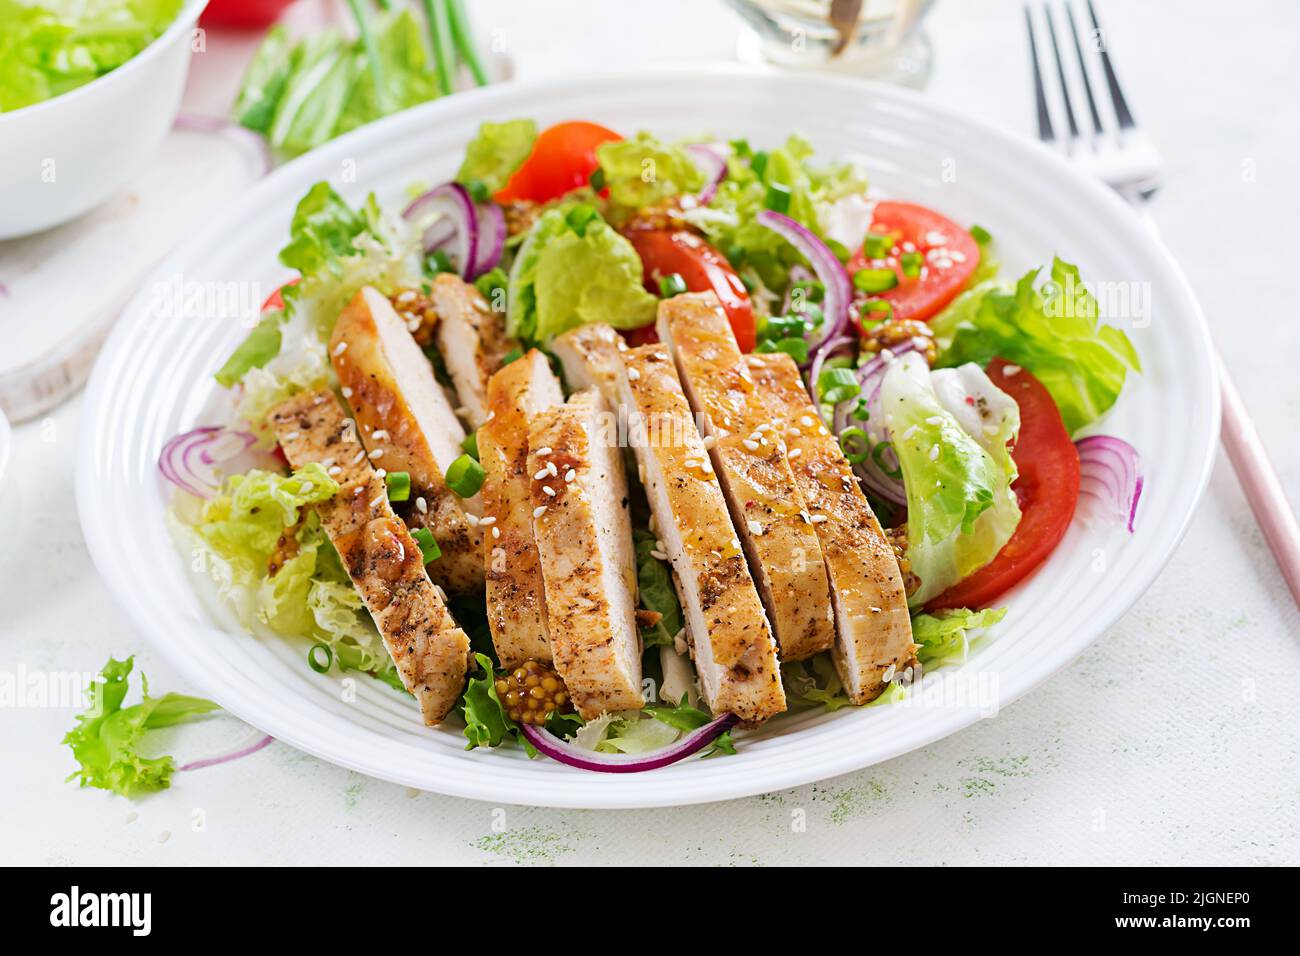 Salad with grilled chicken breast. Fresh vegetable salad with chicken meat. Healthy lunch menu. Diet food. Stock Photo